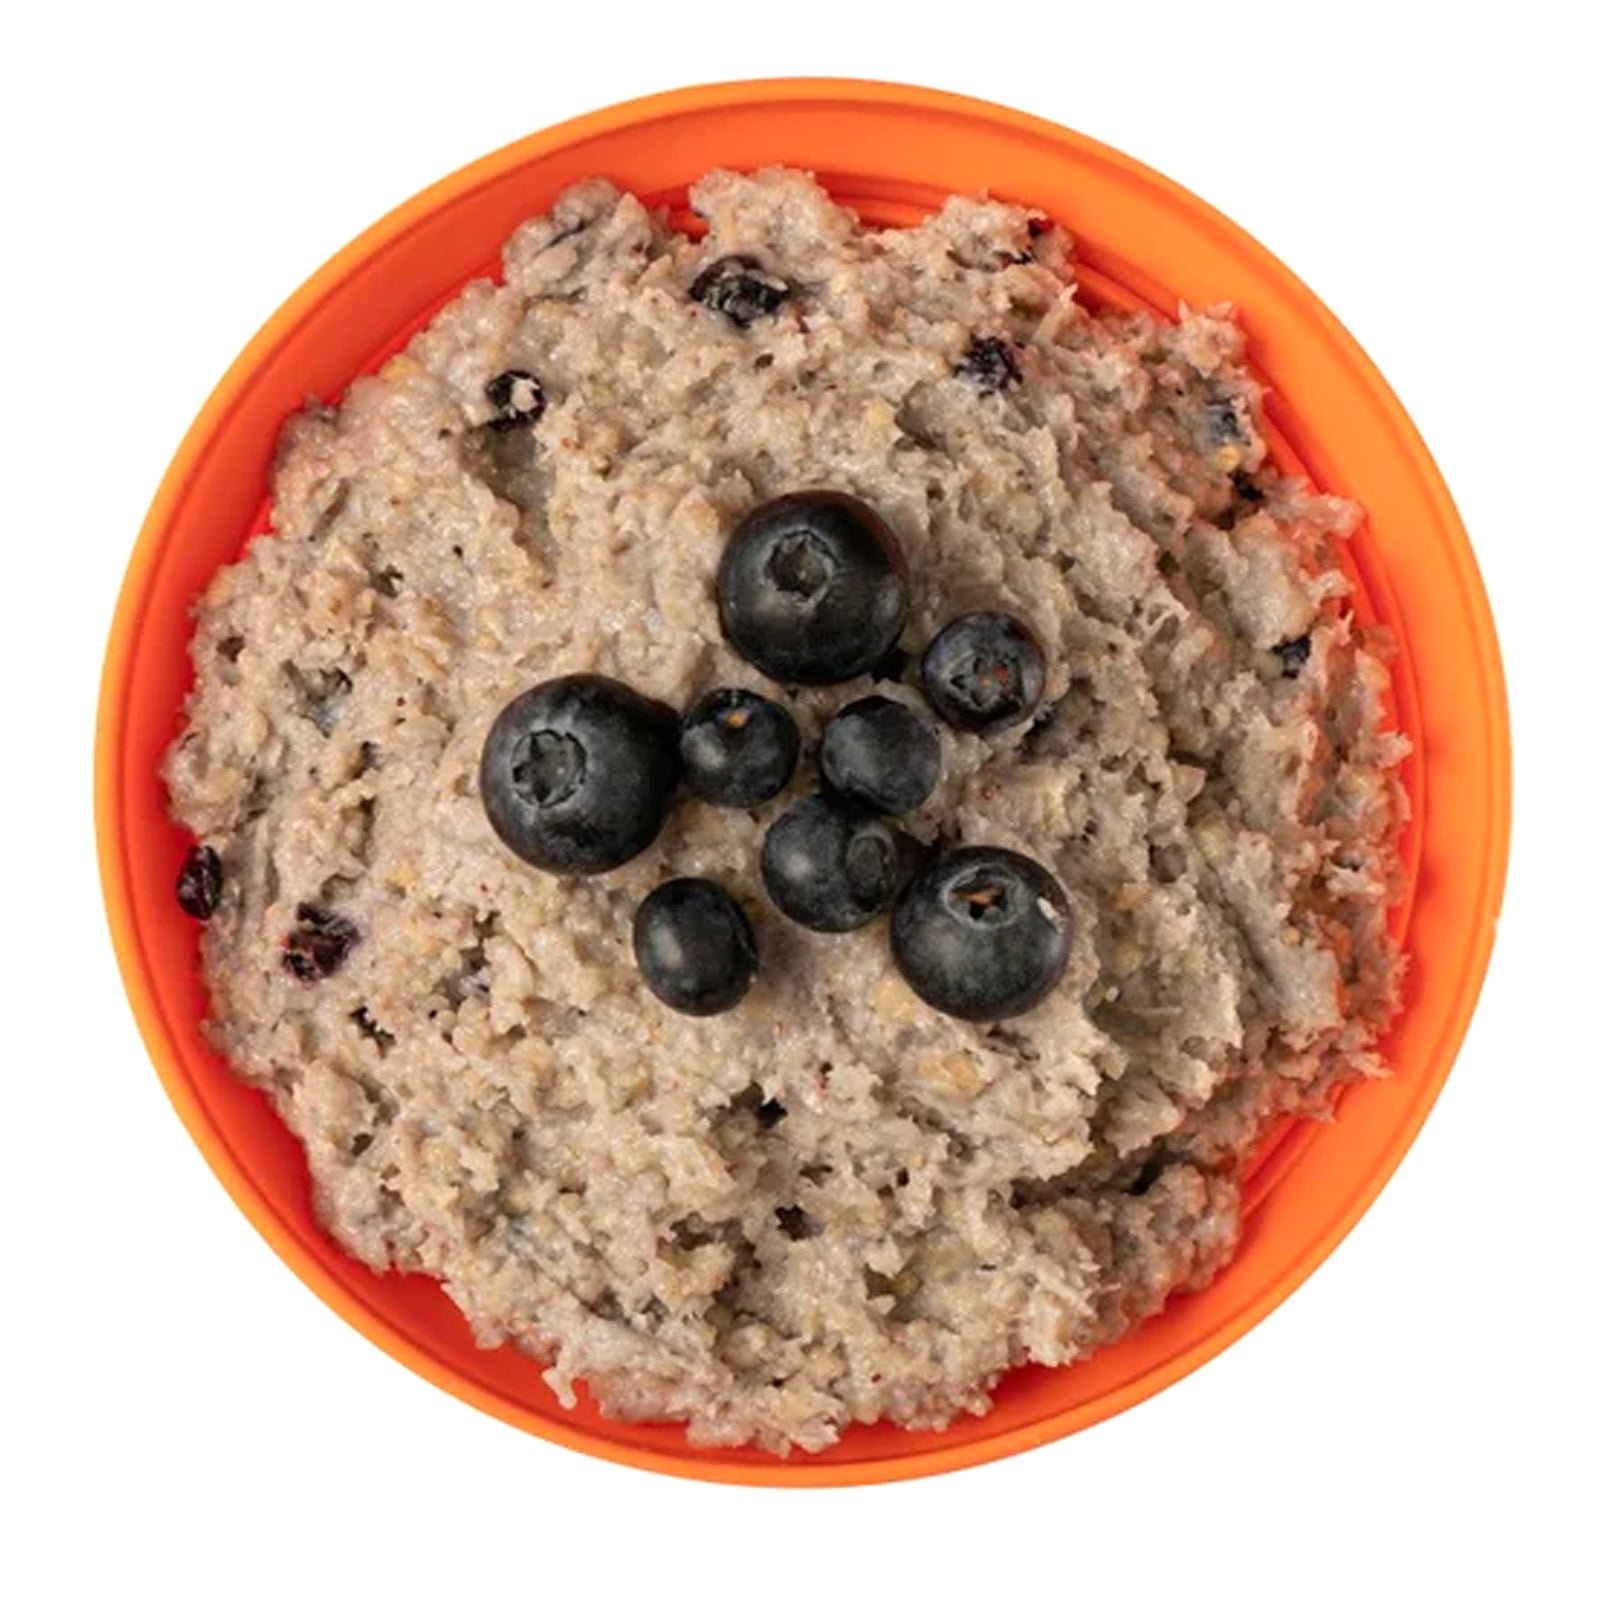 Expedition Foods Porridge with Blueberries Meal